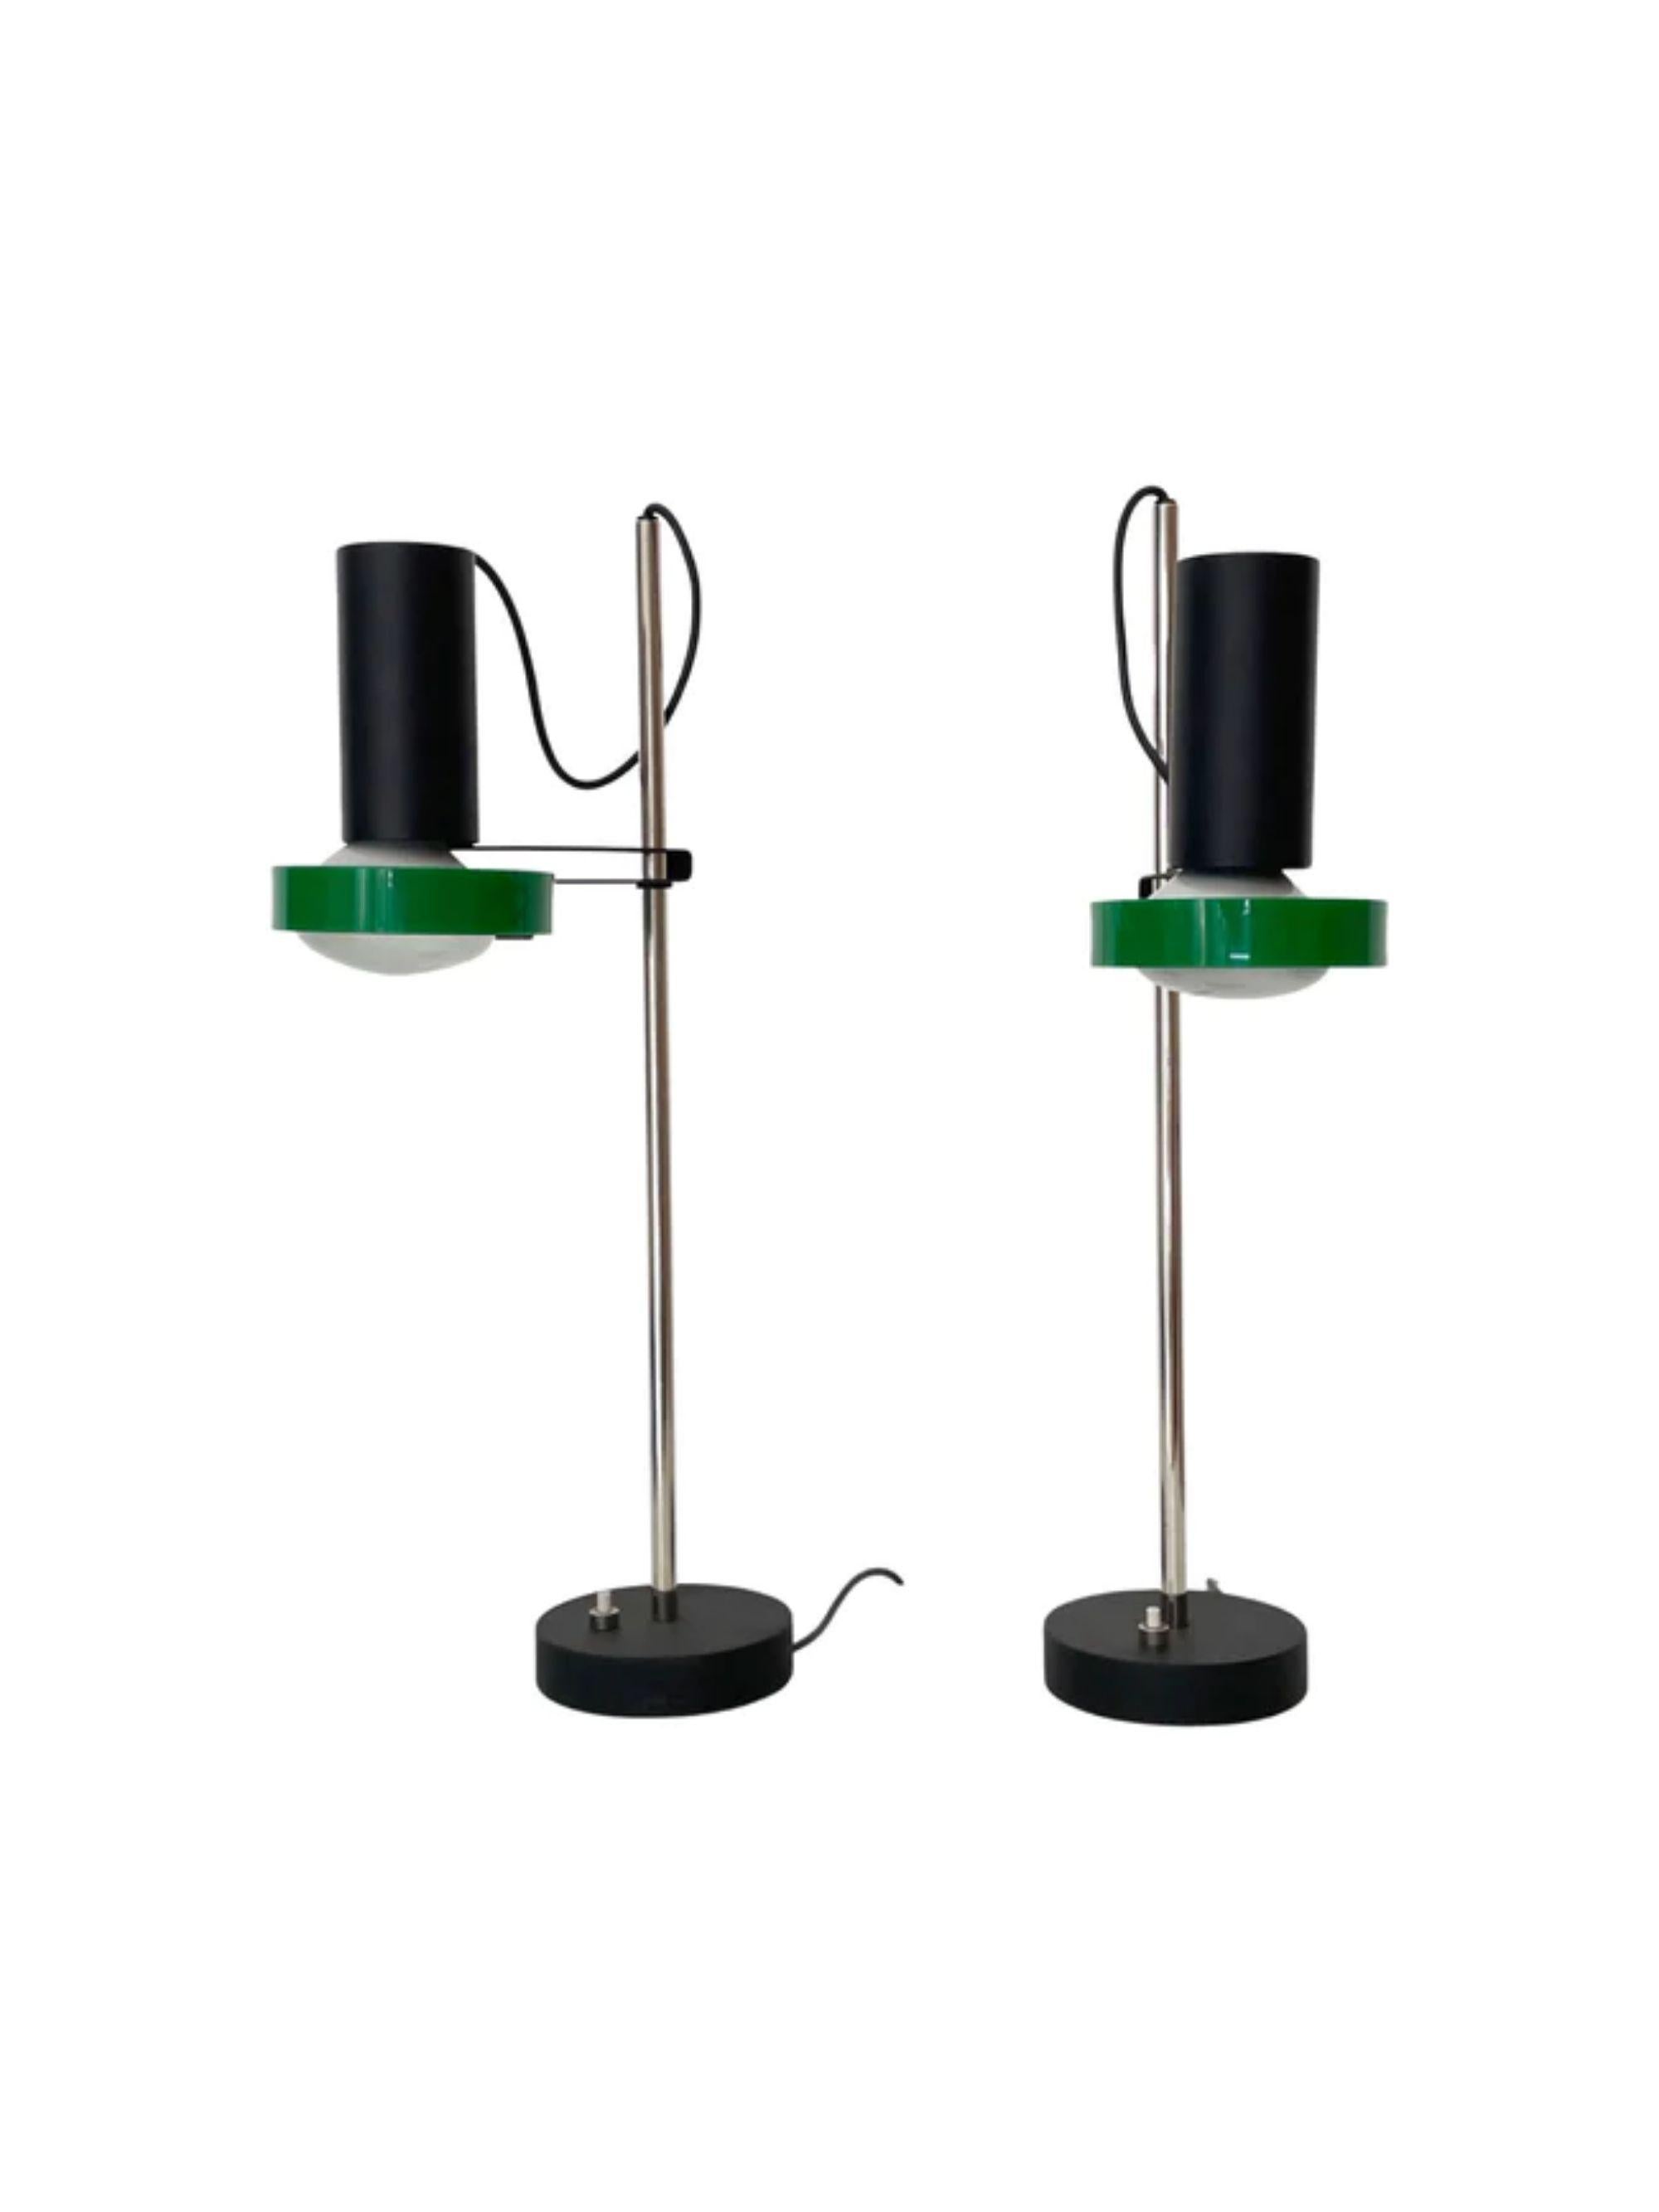 Gino Sarfatti rare model 565 table lamp for Arteluce, Italy, 1960s

Model 565 a direct light table lamp designed in 1956, has distinctive steel spring that holds the spotlight reflector.
Two matching lamps available. 

Additional